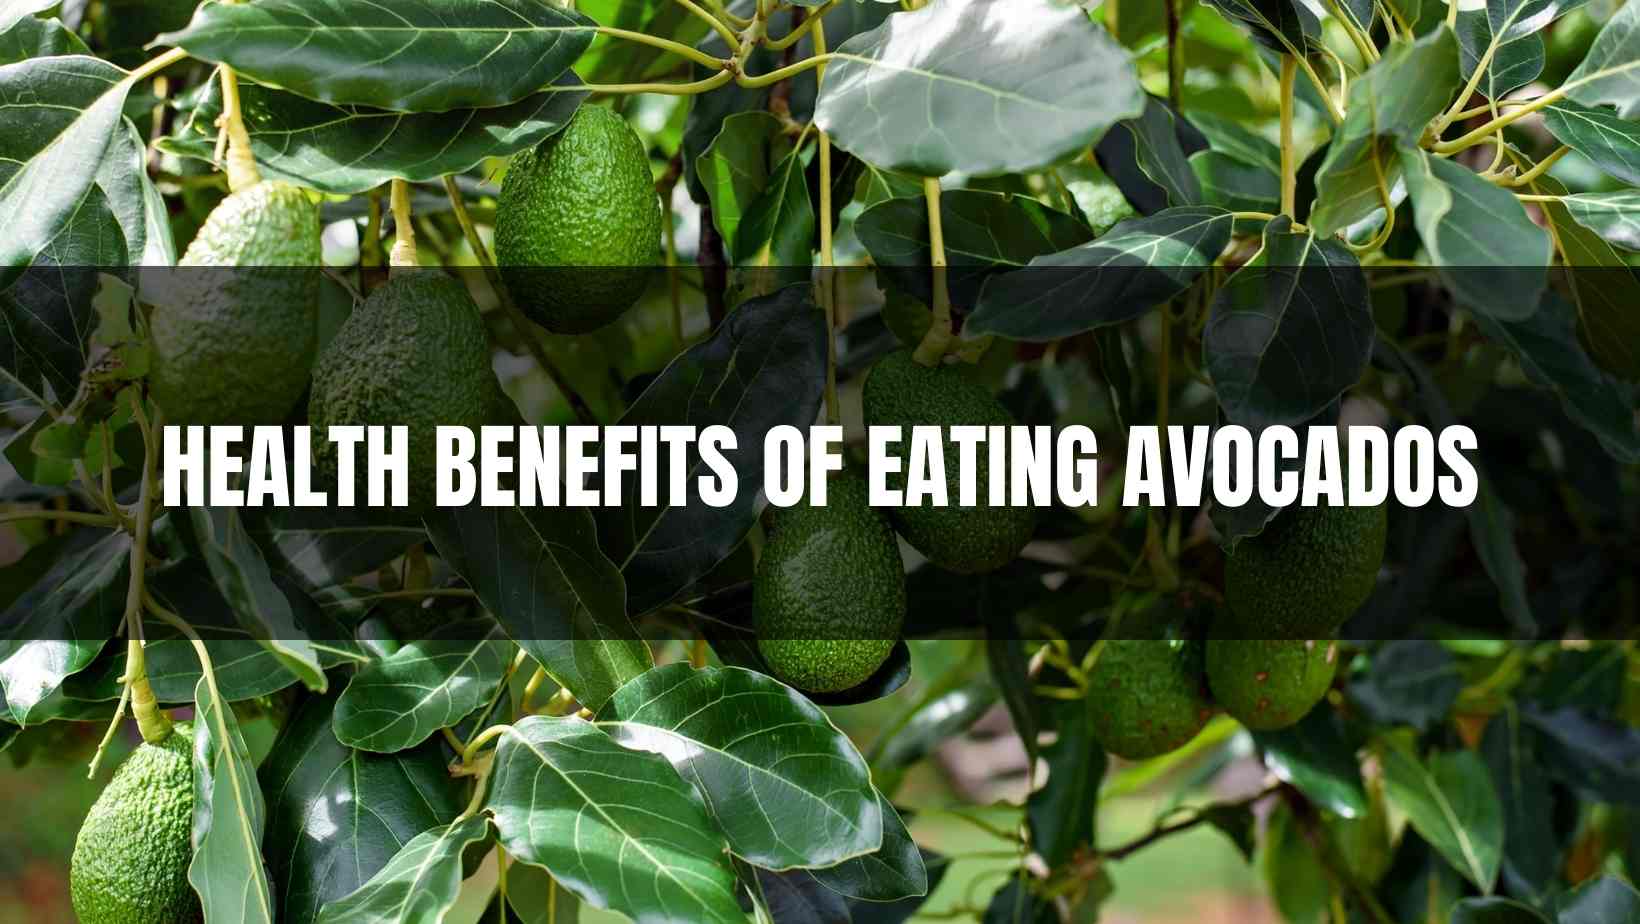 Health Benefits of Eating Avocados